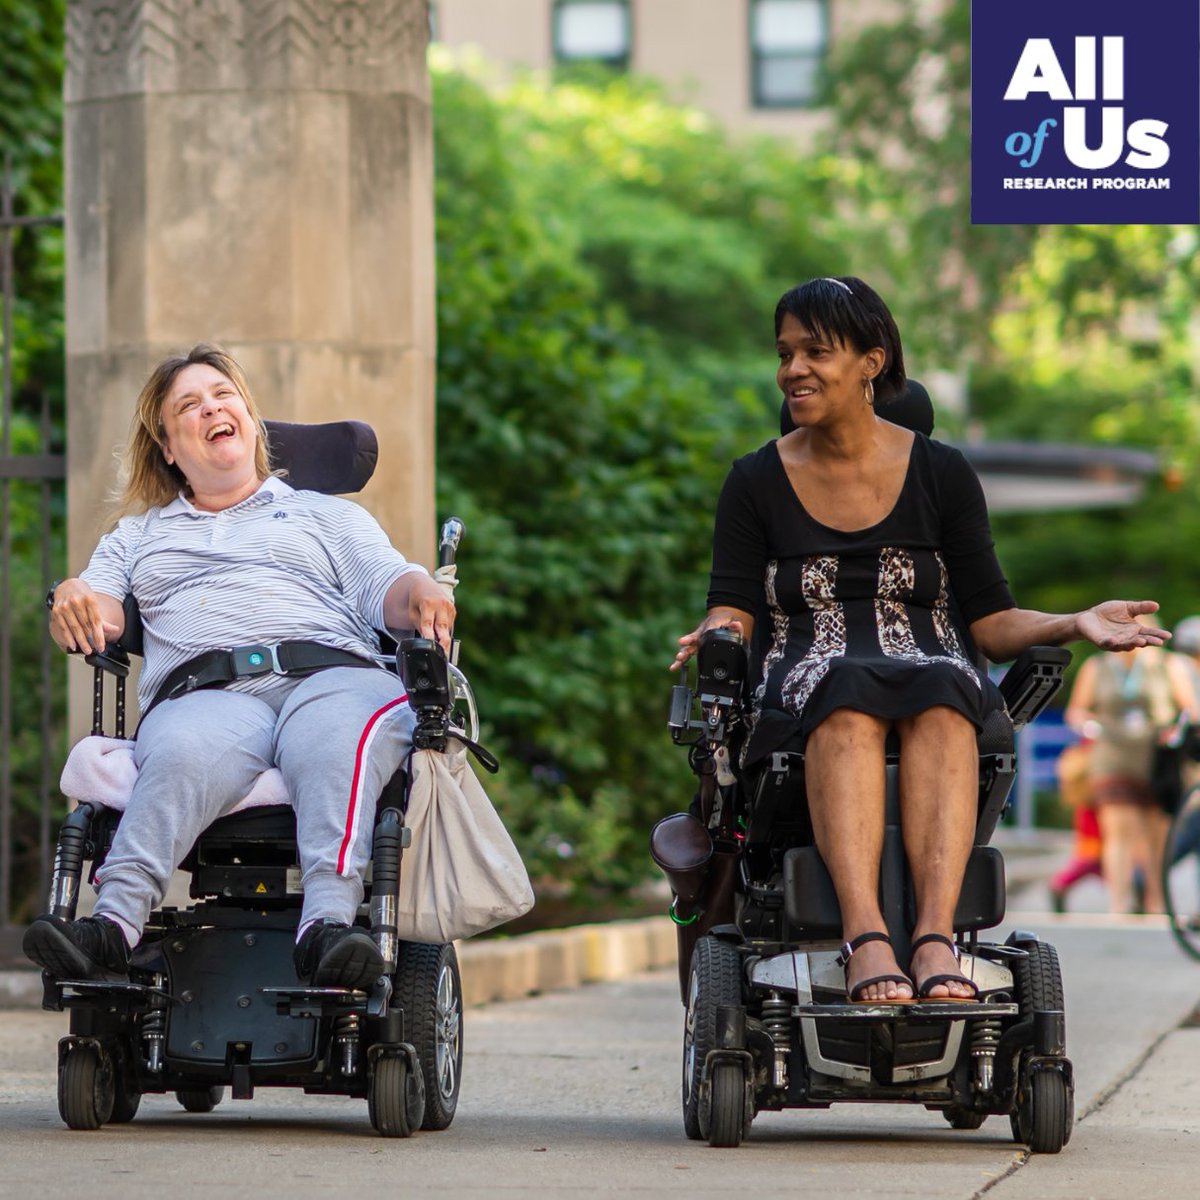 Mobility disabilities affect 1 in 7 adults. They are the most common type of disability. But the #disability experience is different for everyone. This #MobilityAwareness Month, help make health research more inclusive: JoinAllofUs.org/Disability #AllofUsInclusion #JoinAllofUs